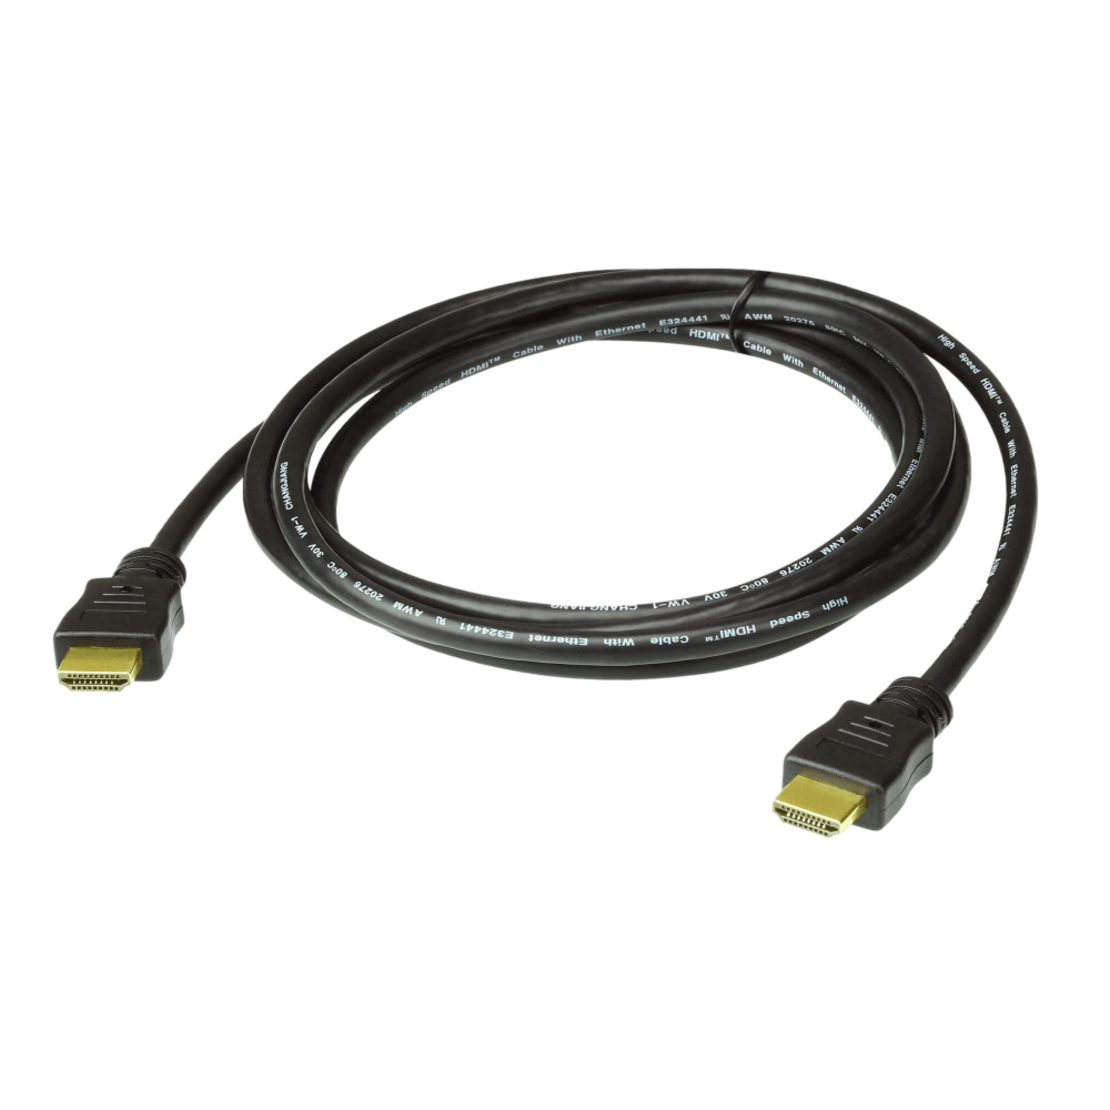 ATEN 1 m High Speed True 4K HDMI Cable with Ethernet 2L-7D01H